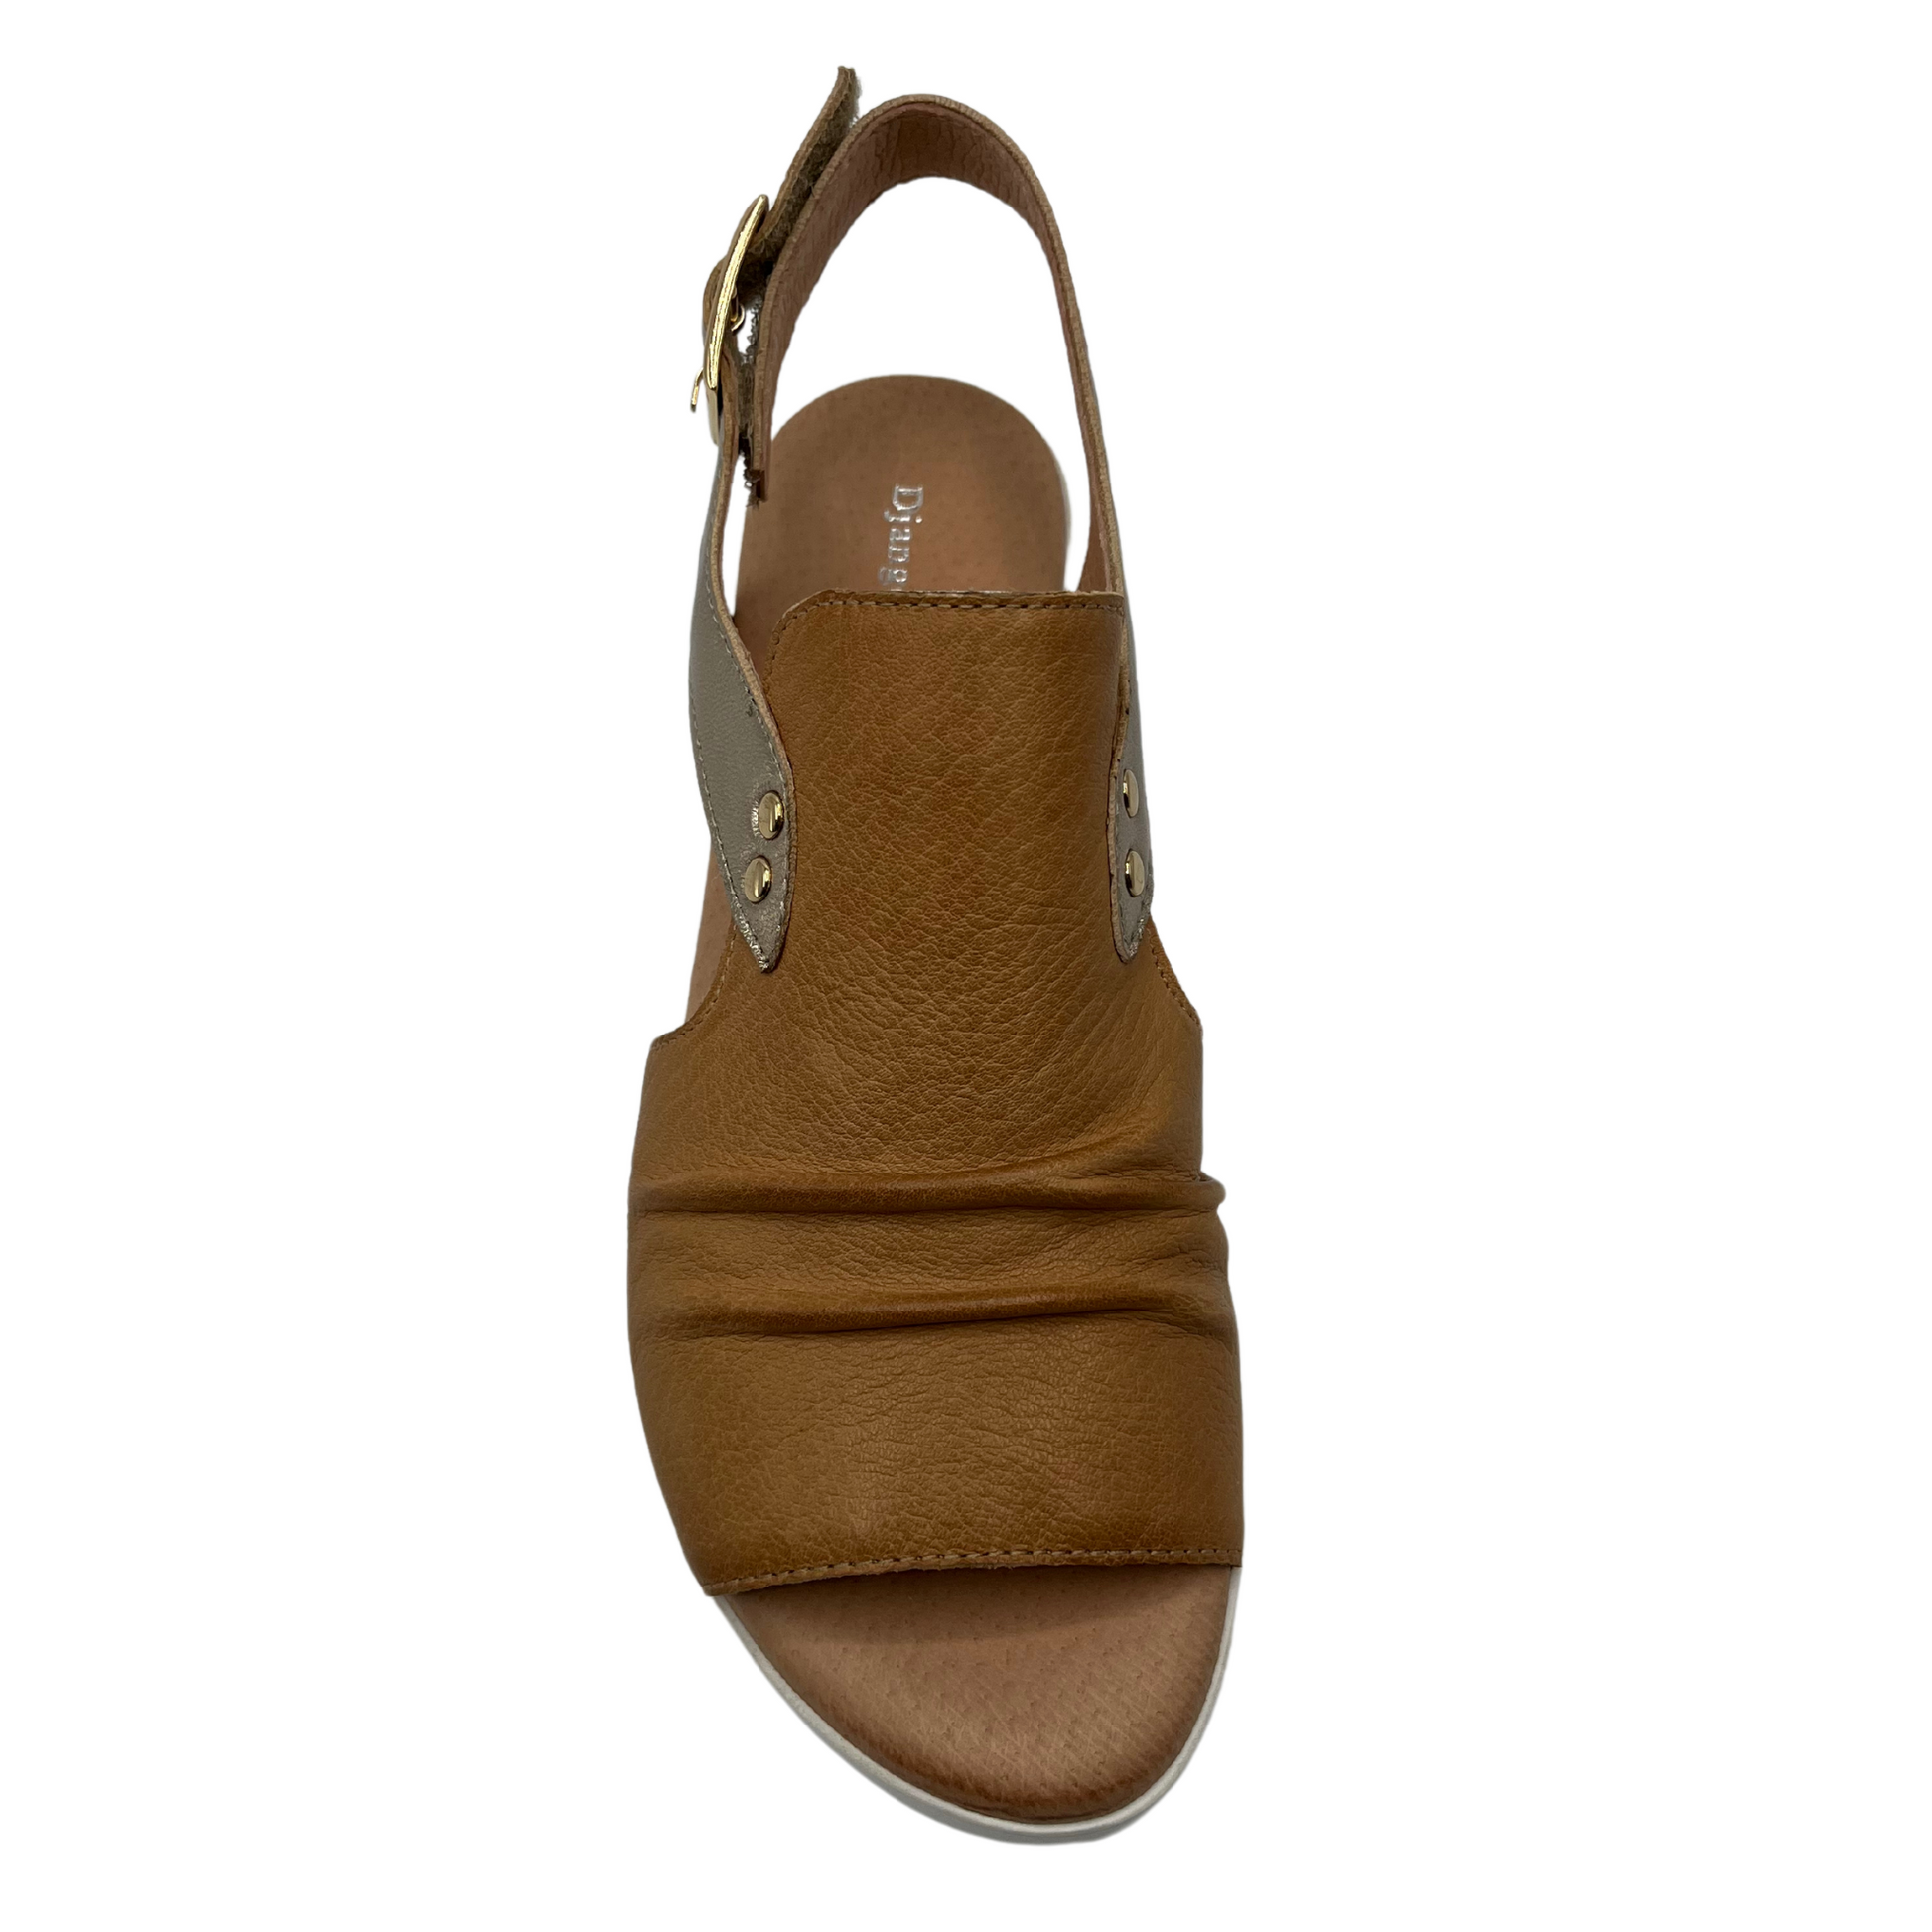 Top view of brown leather sandal with open toe and gold slingback strap